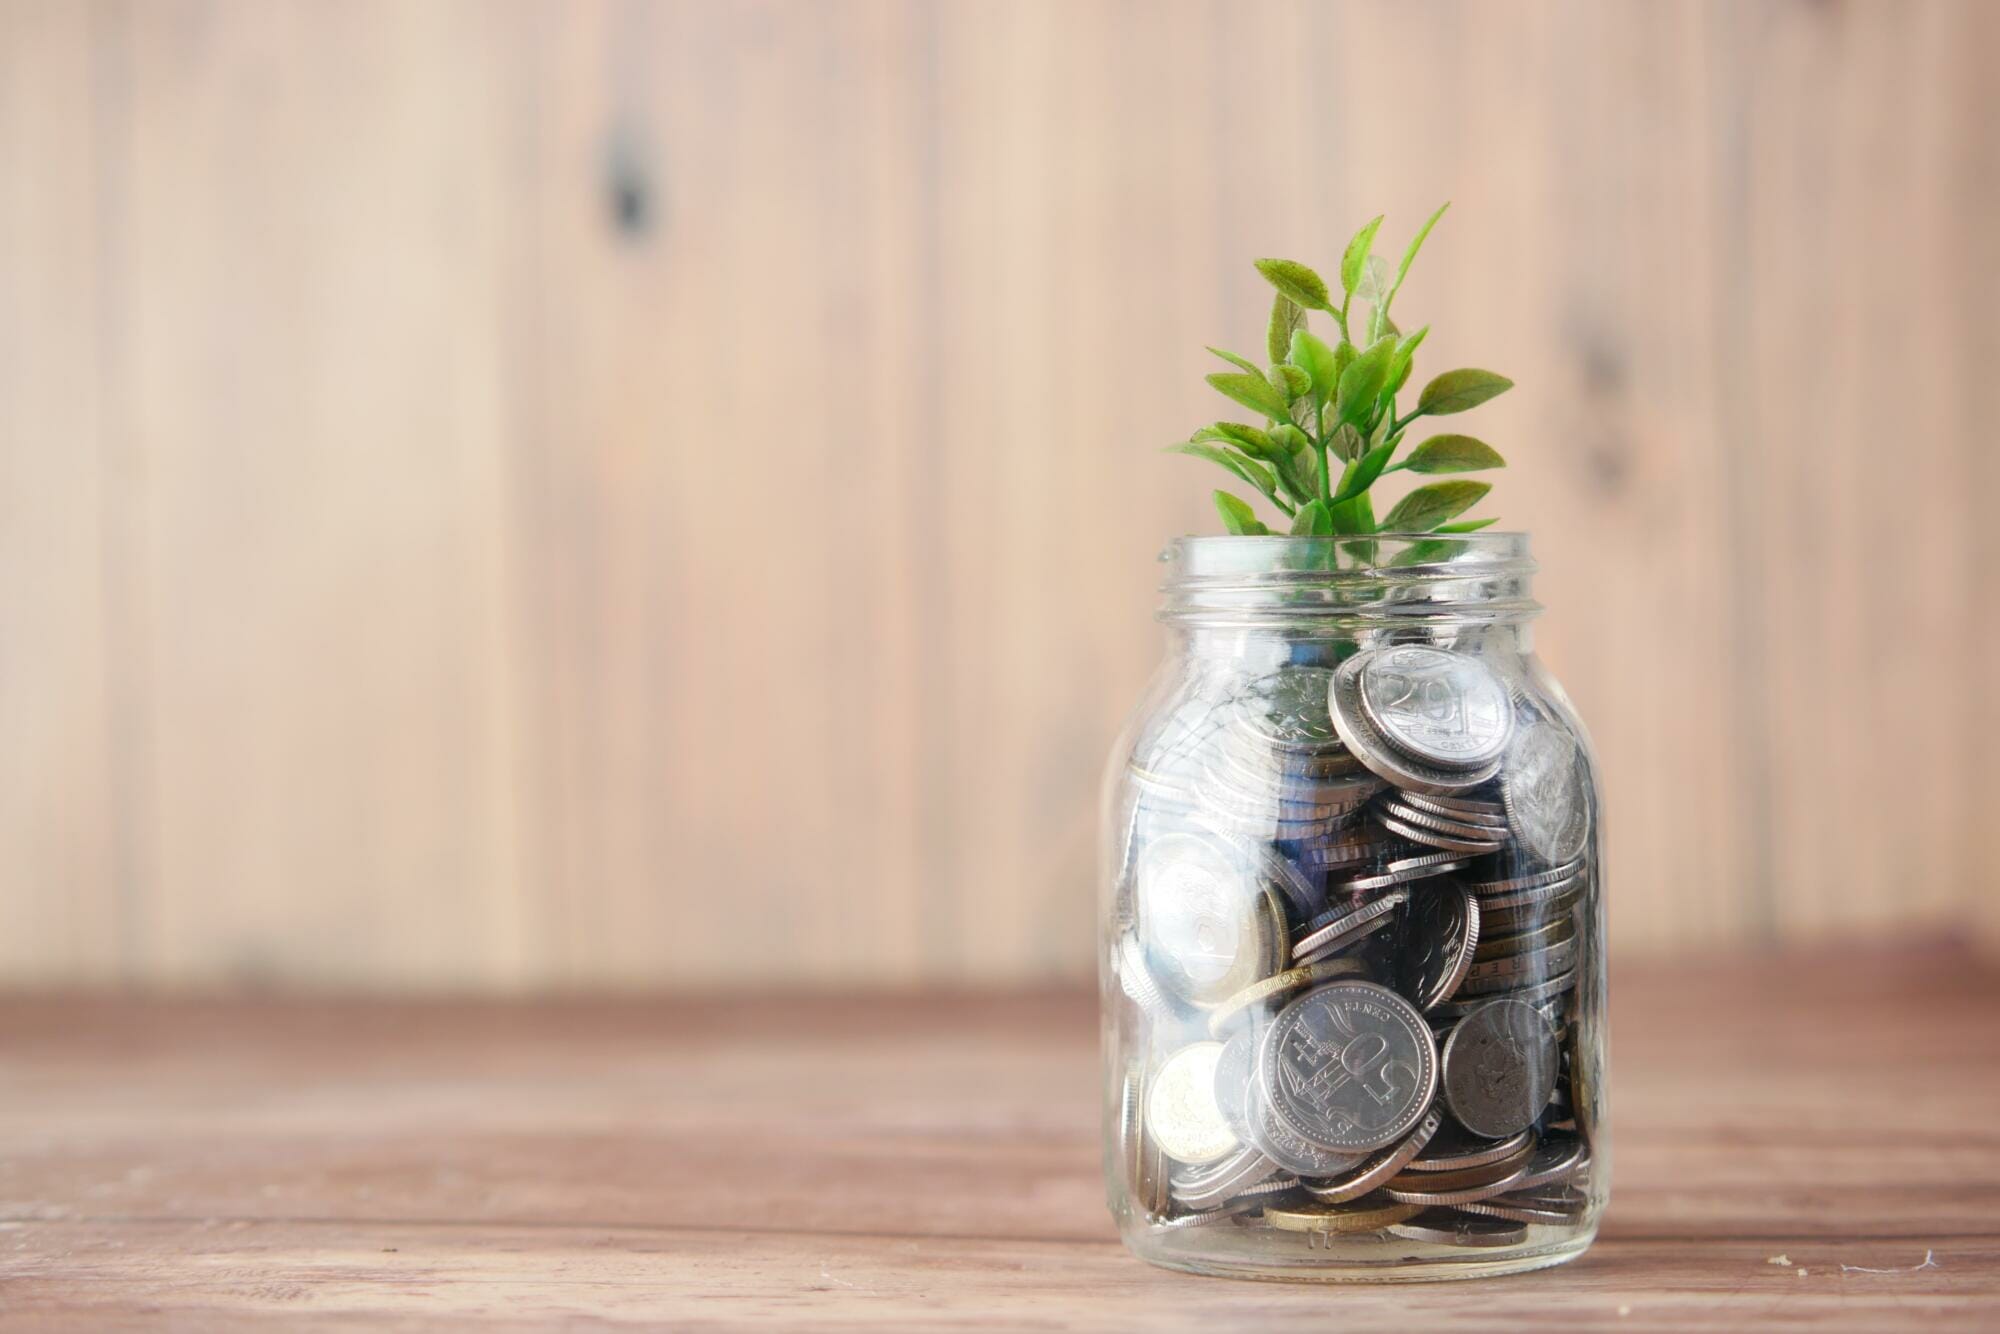 Mason jar filled with coins and plant sprouting from inside.